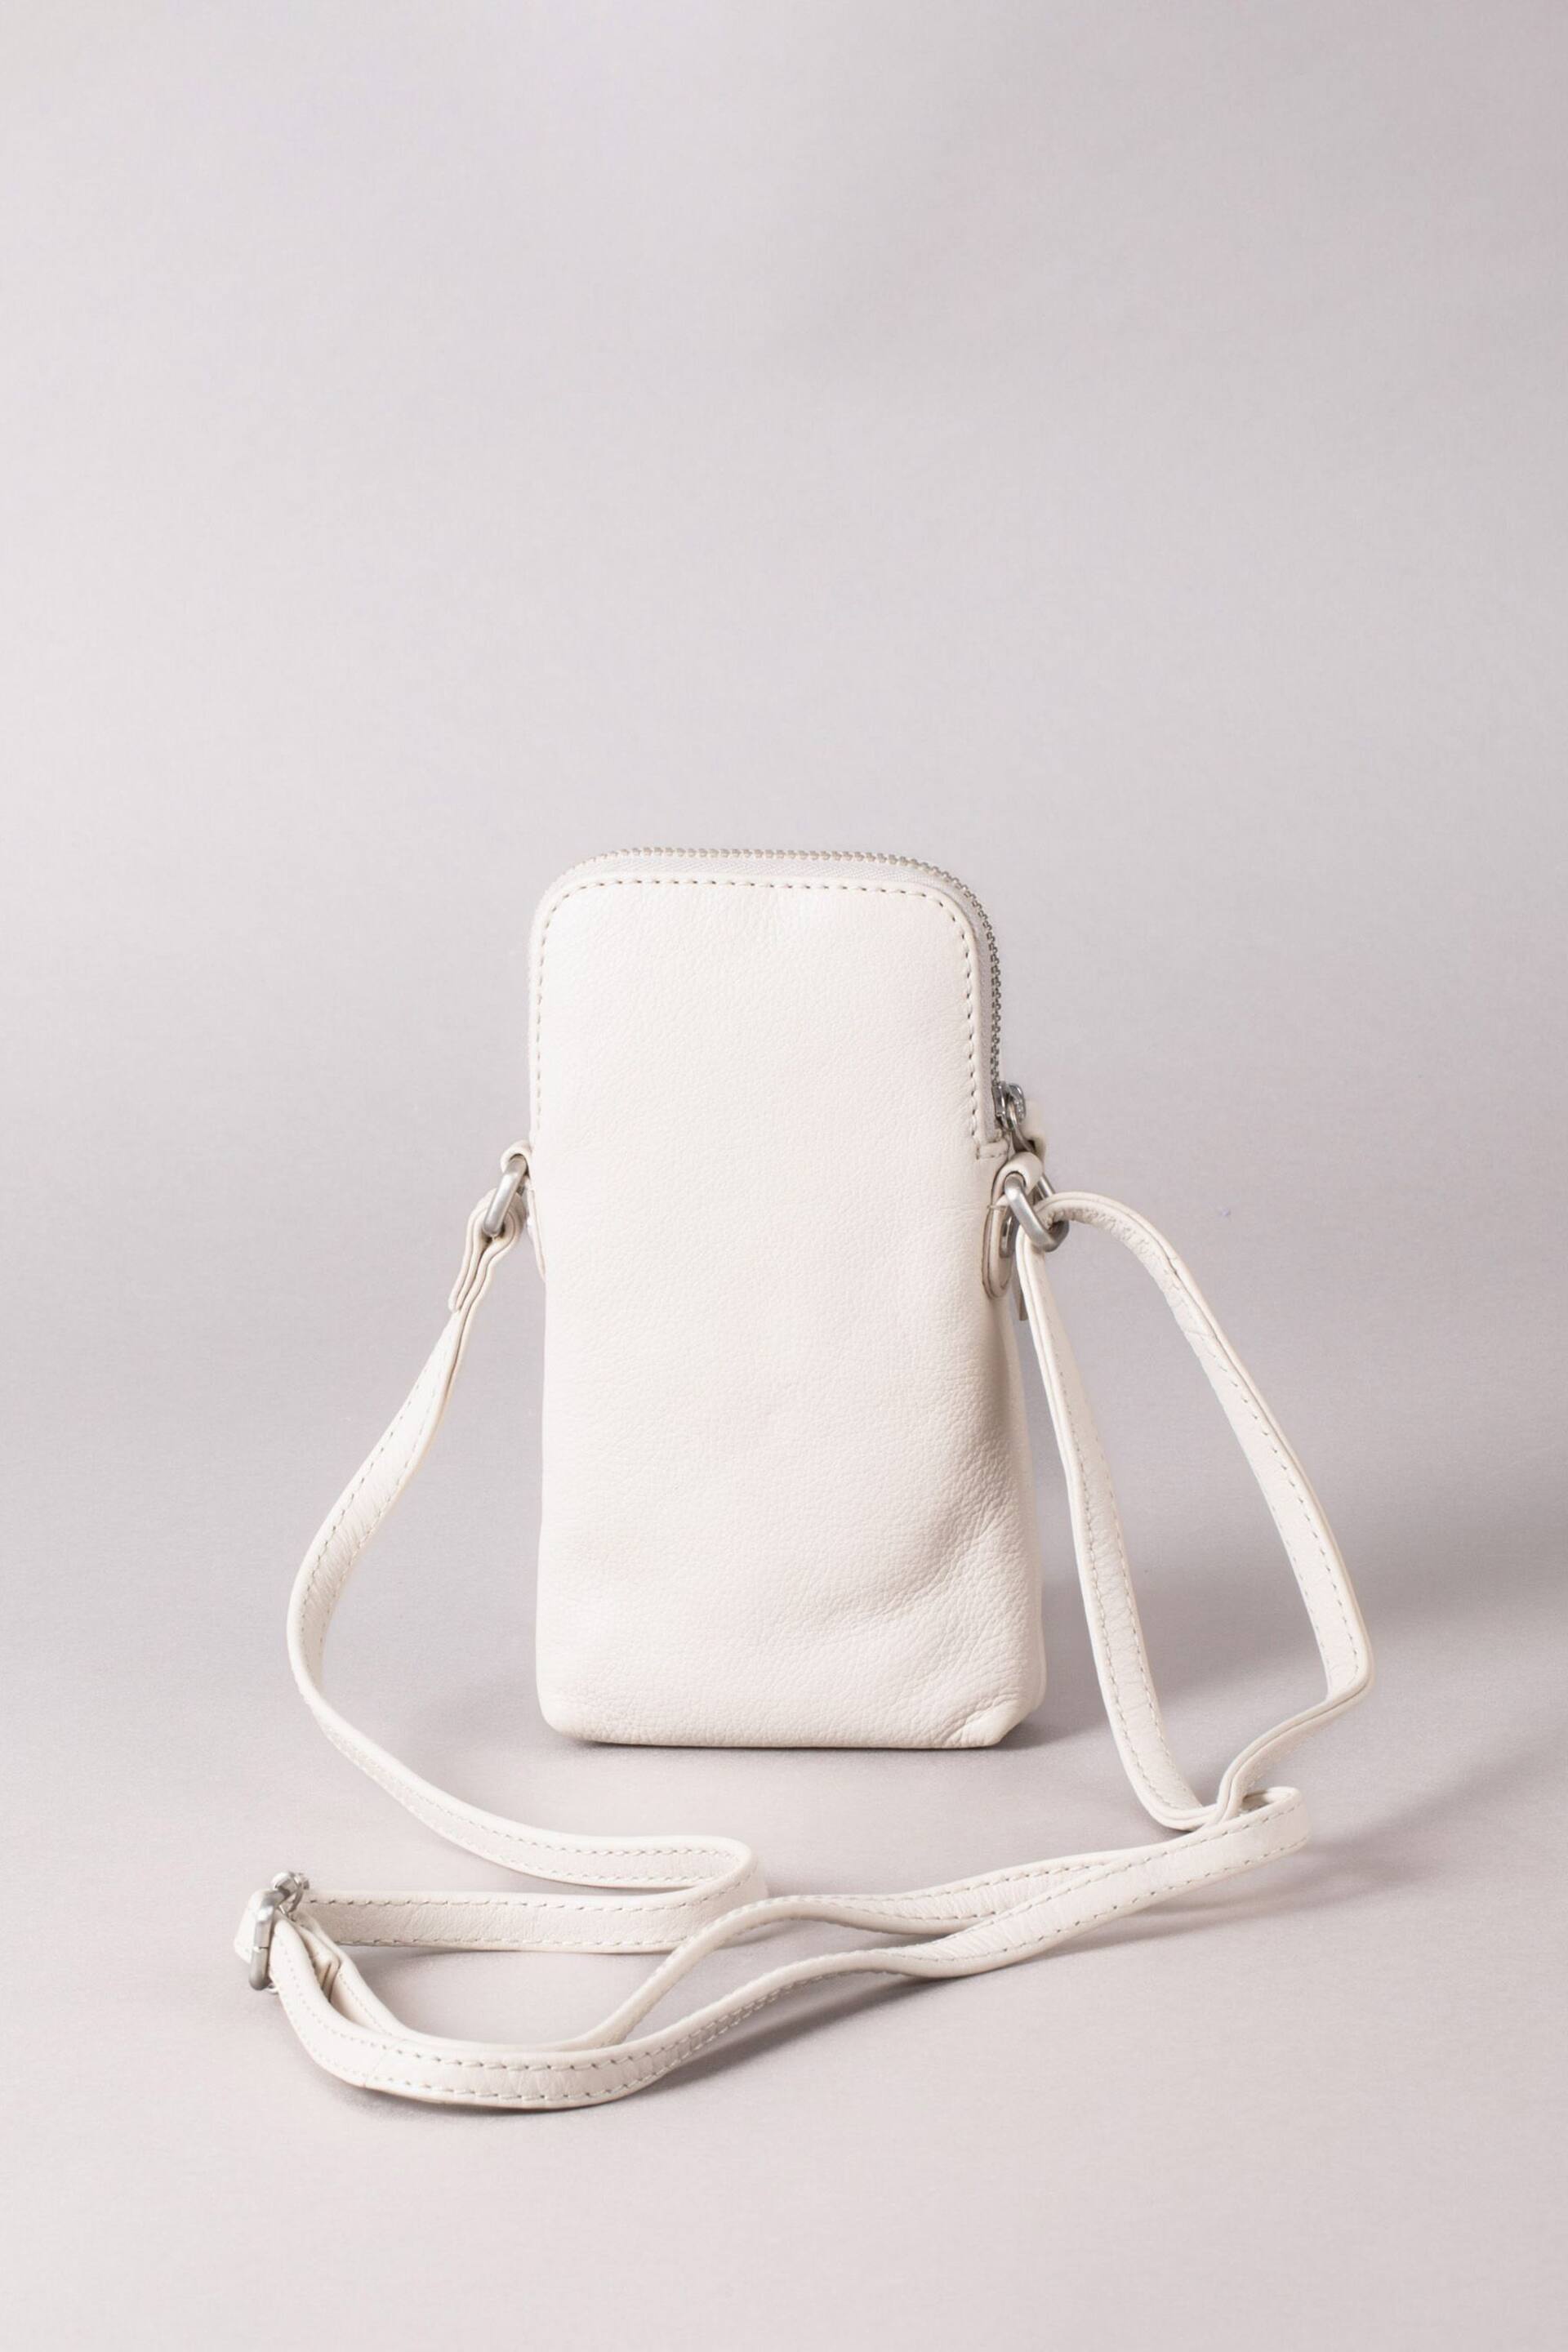 Lakeland Leather White Lakeland Leather Coniston Leather Cross Body Phone Pouch - Image 3 of 6